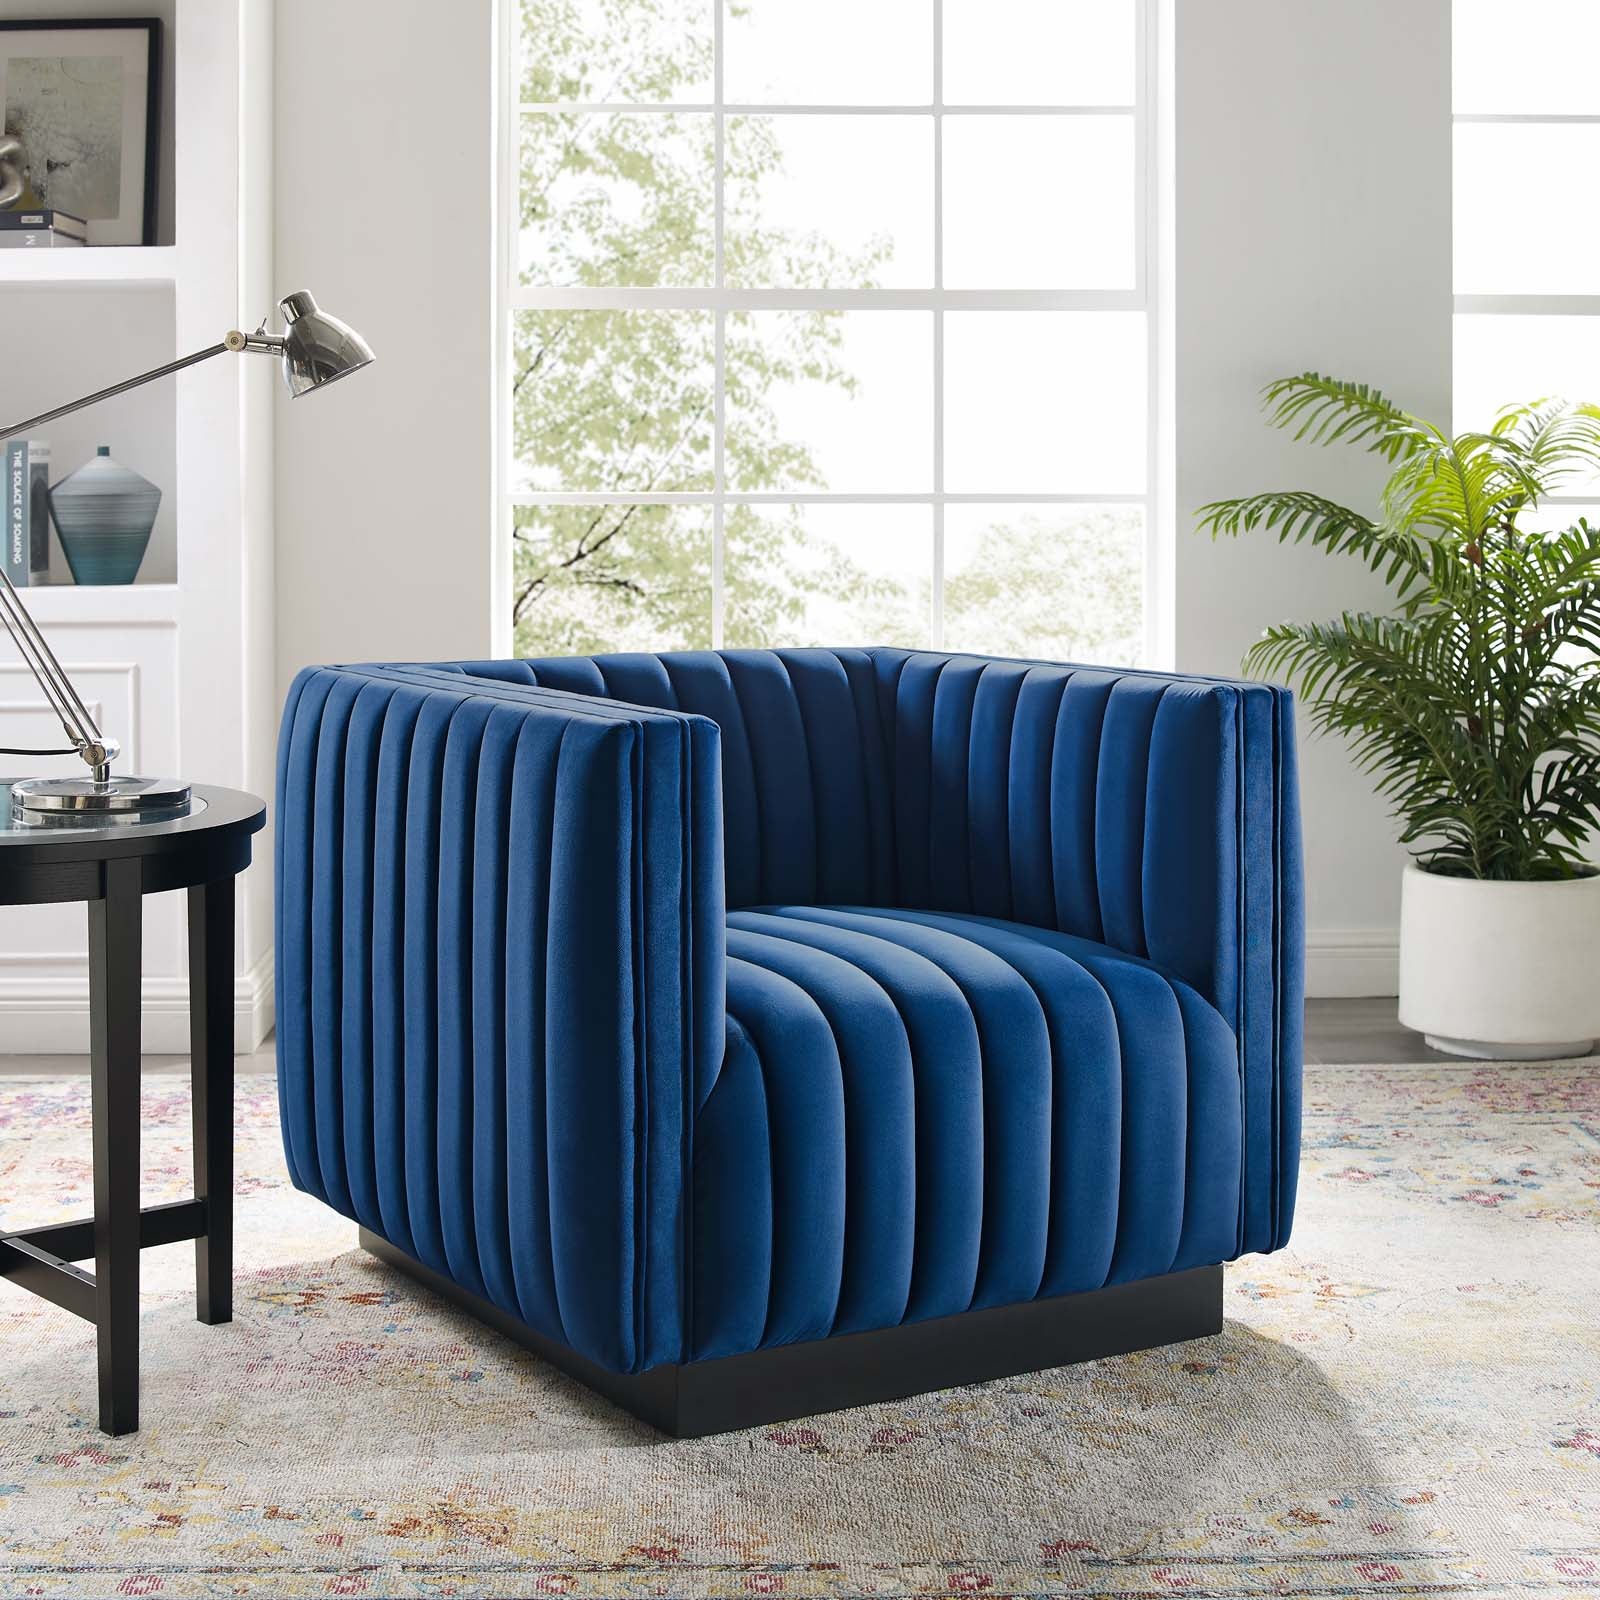 Conjure Channel Tufted Performance Velvet Accent Armchair - East Shore Modern Home Furnishings